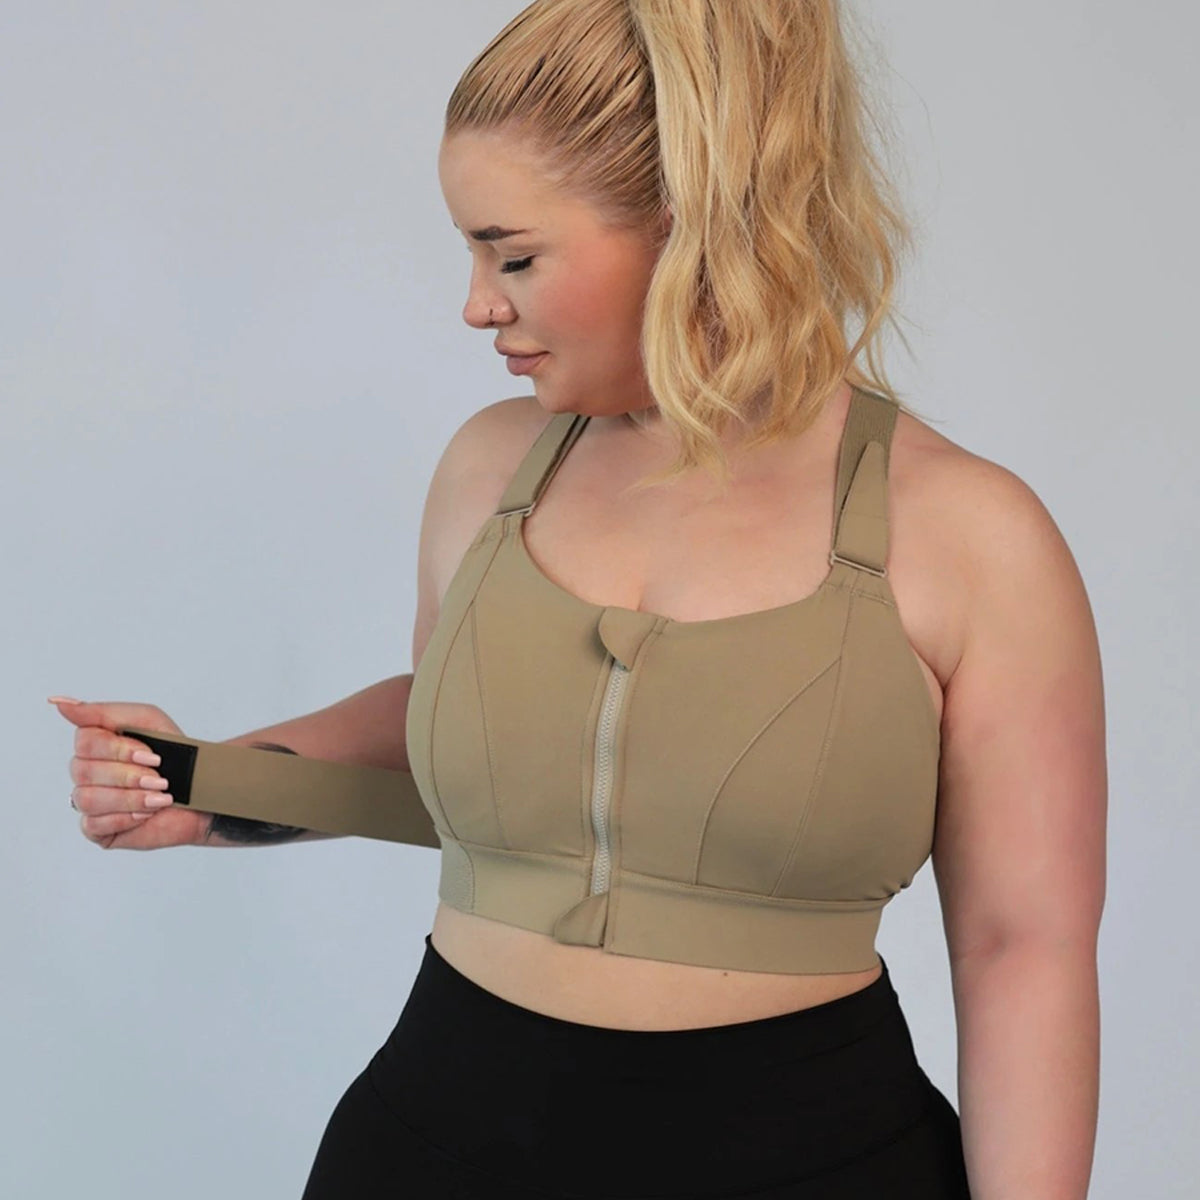 Review – Sports Bra for Large Chested Women – Shock Absorber